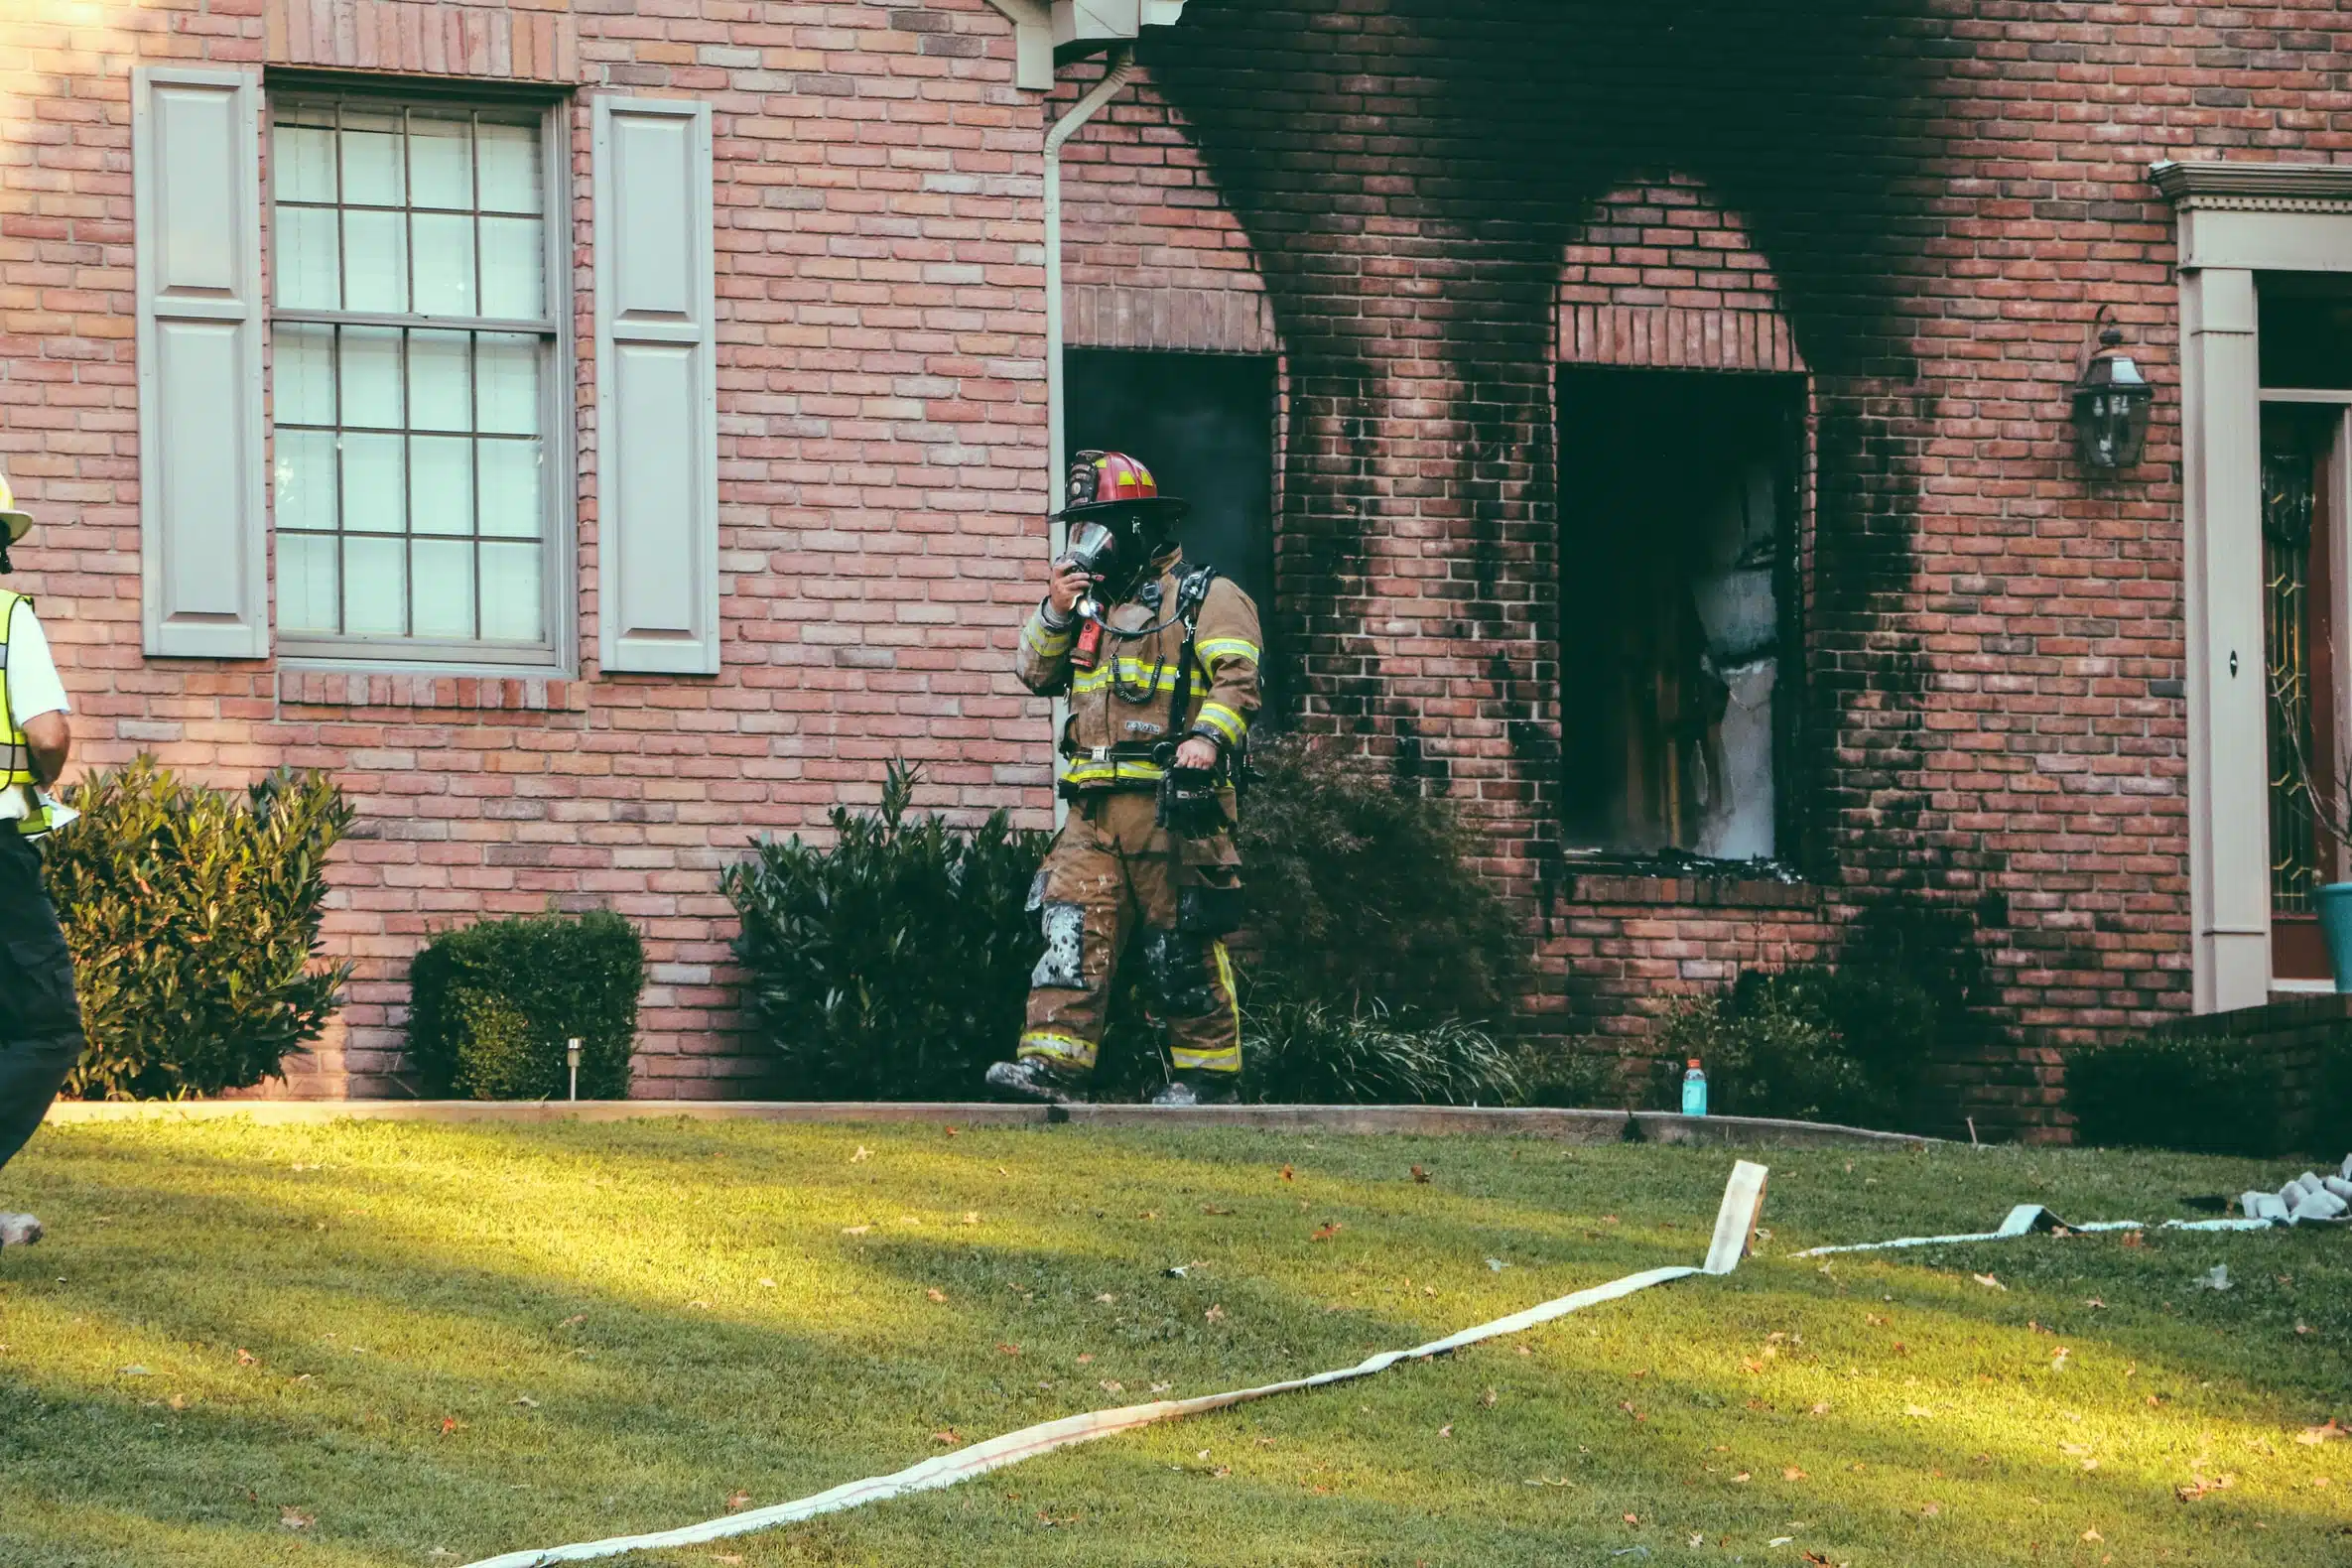 Firefighter on duty in the area of a house that caught fire.